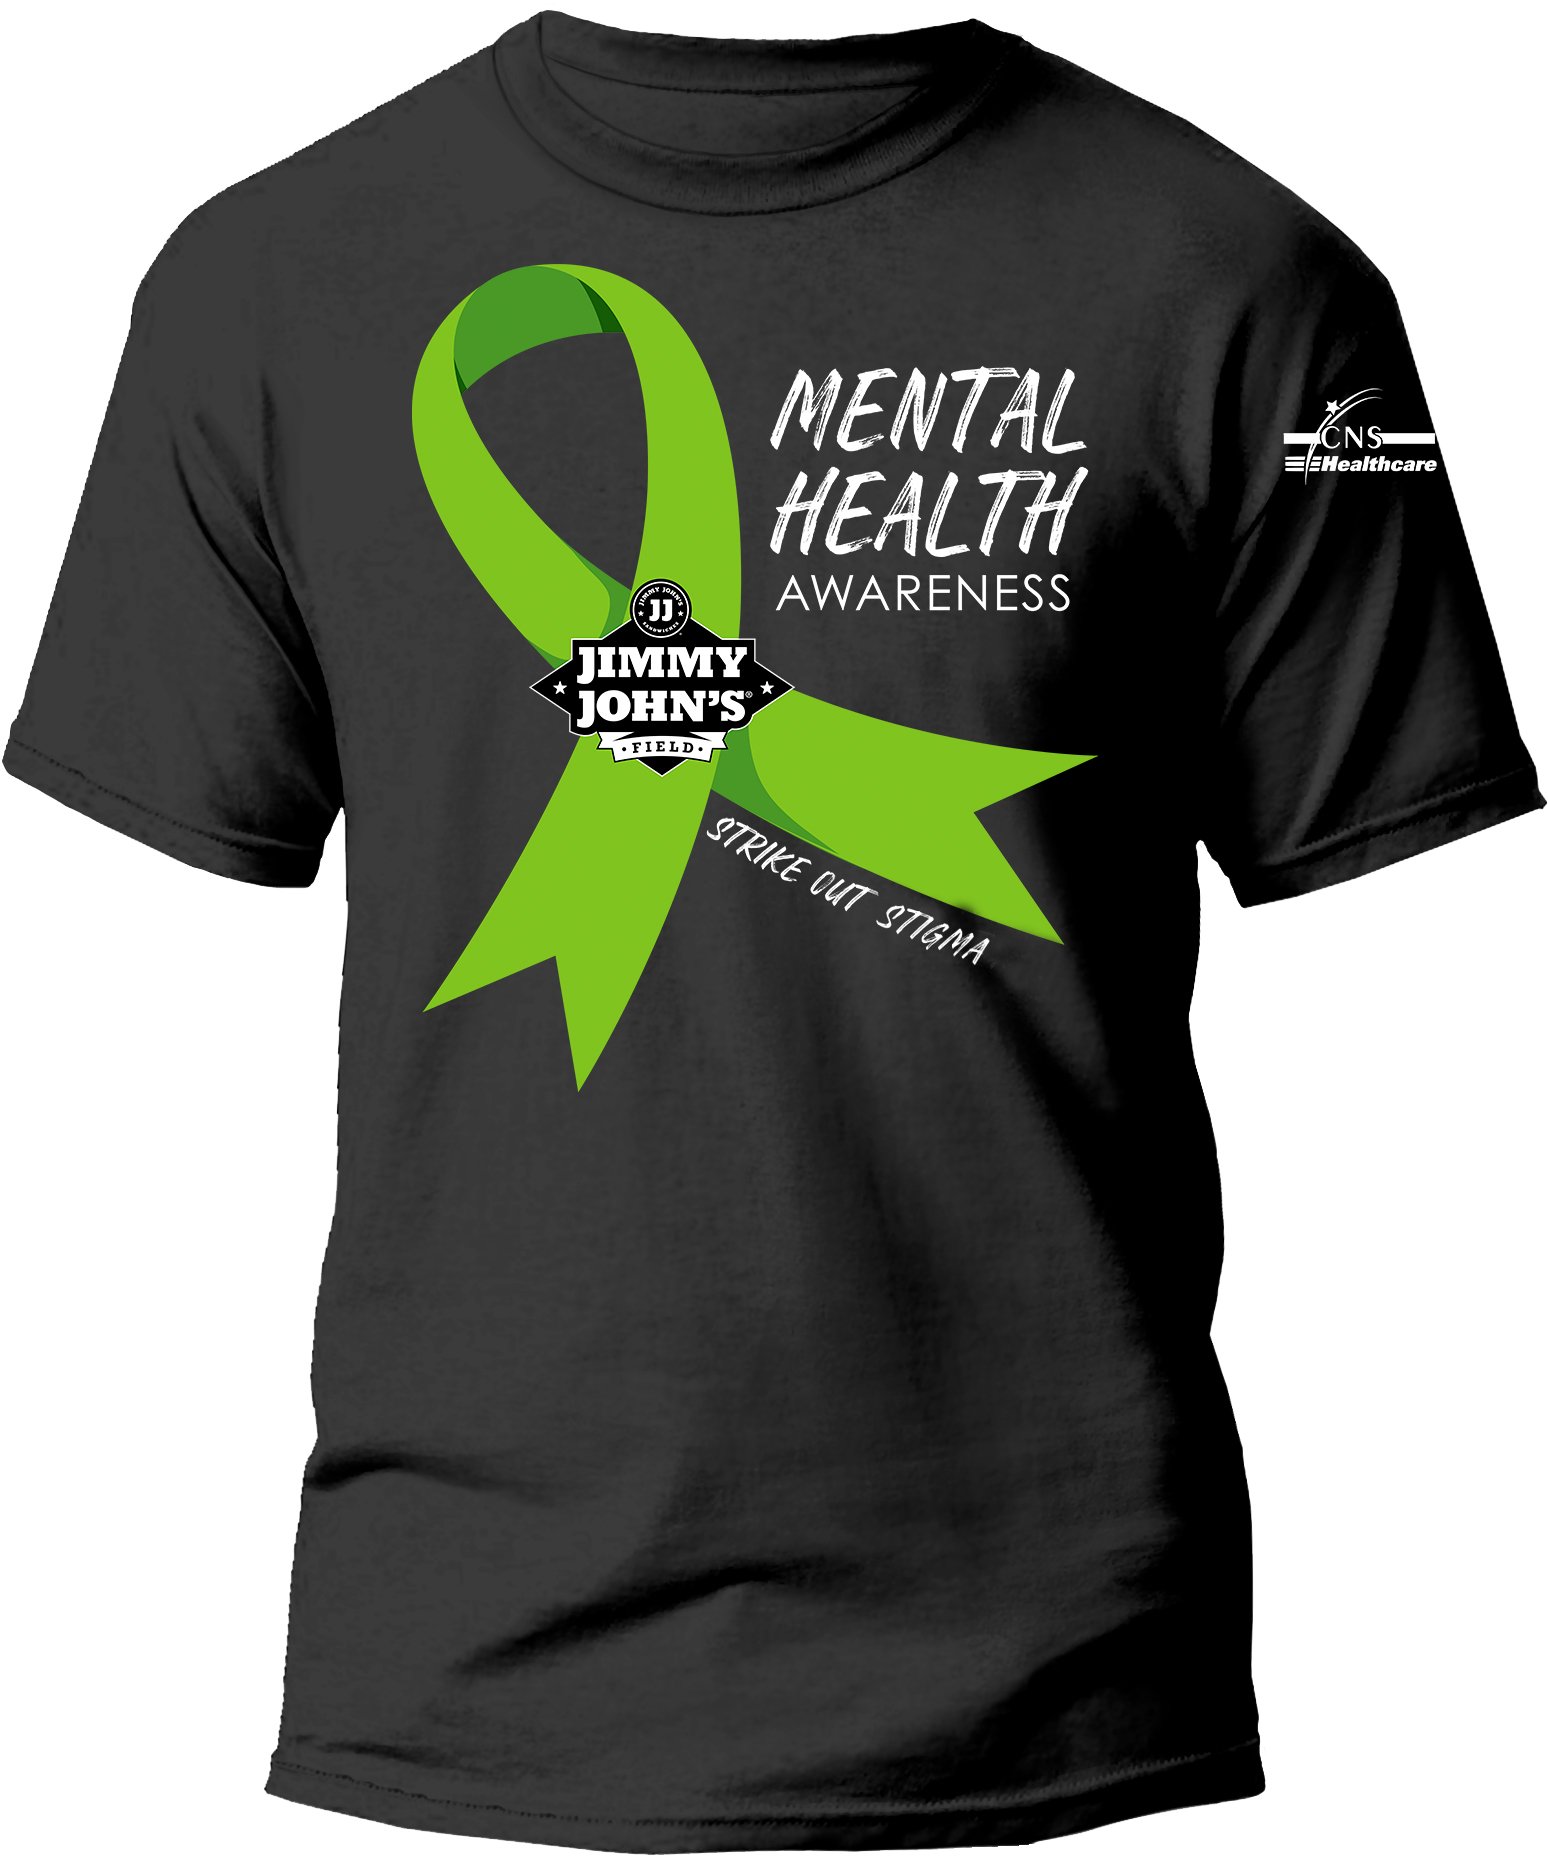 Mental Health Awareness Night presented by CNS Healthcare - United ...